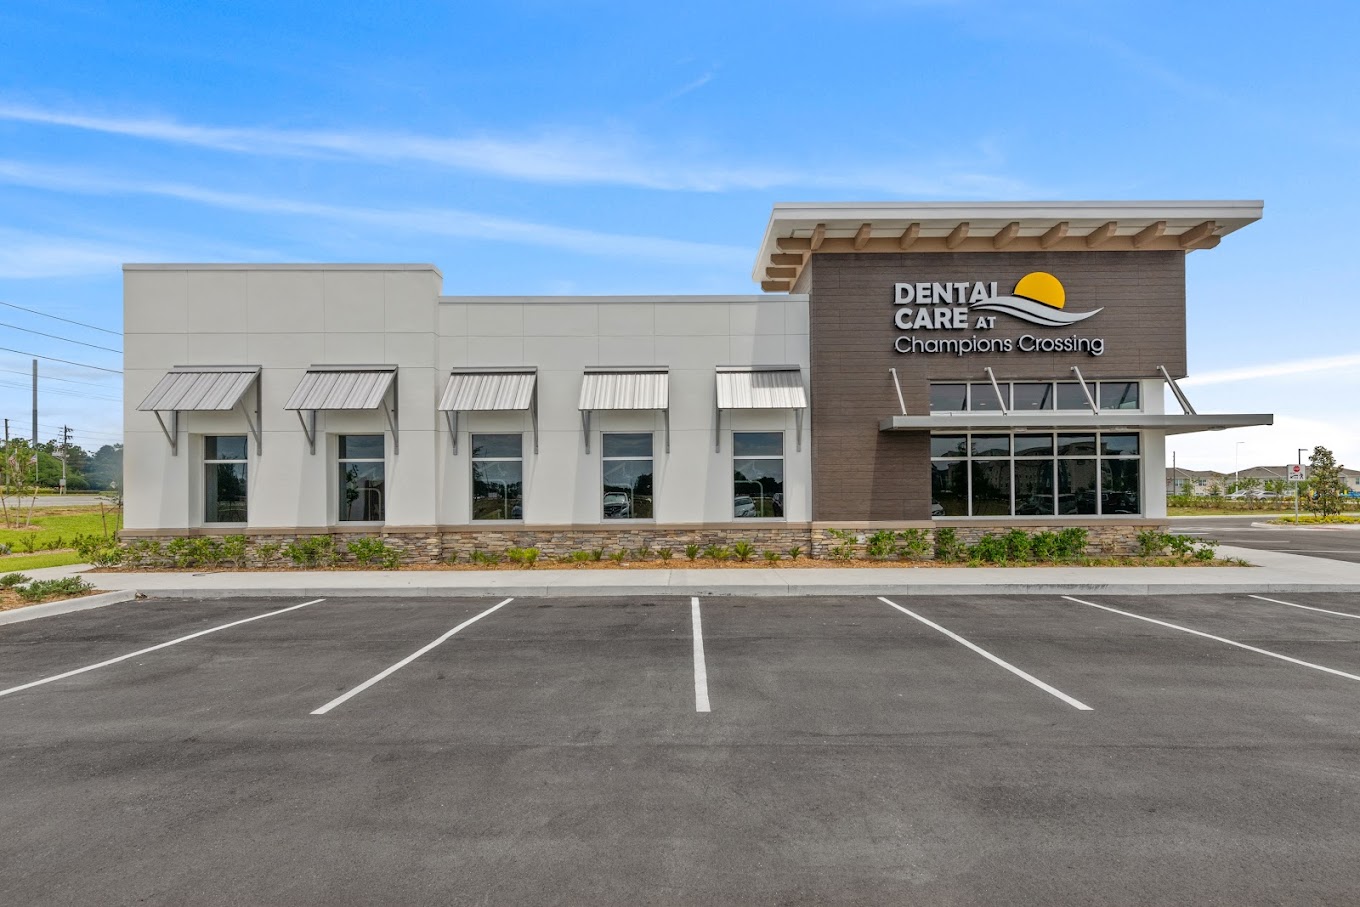 rendering of heartland dental retail project dental care at champions crossing in Davenport Florida